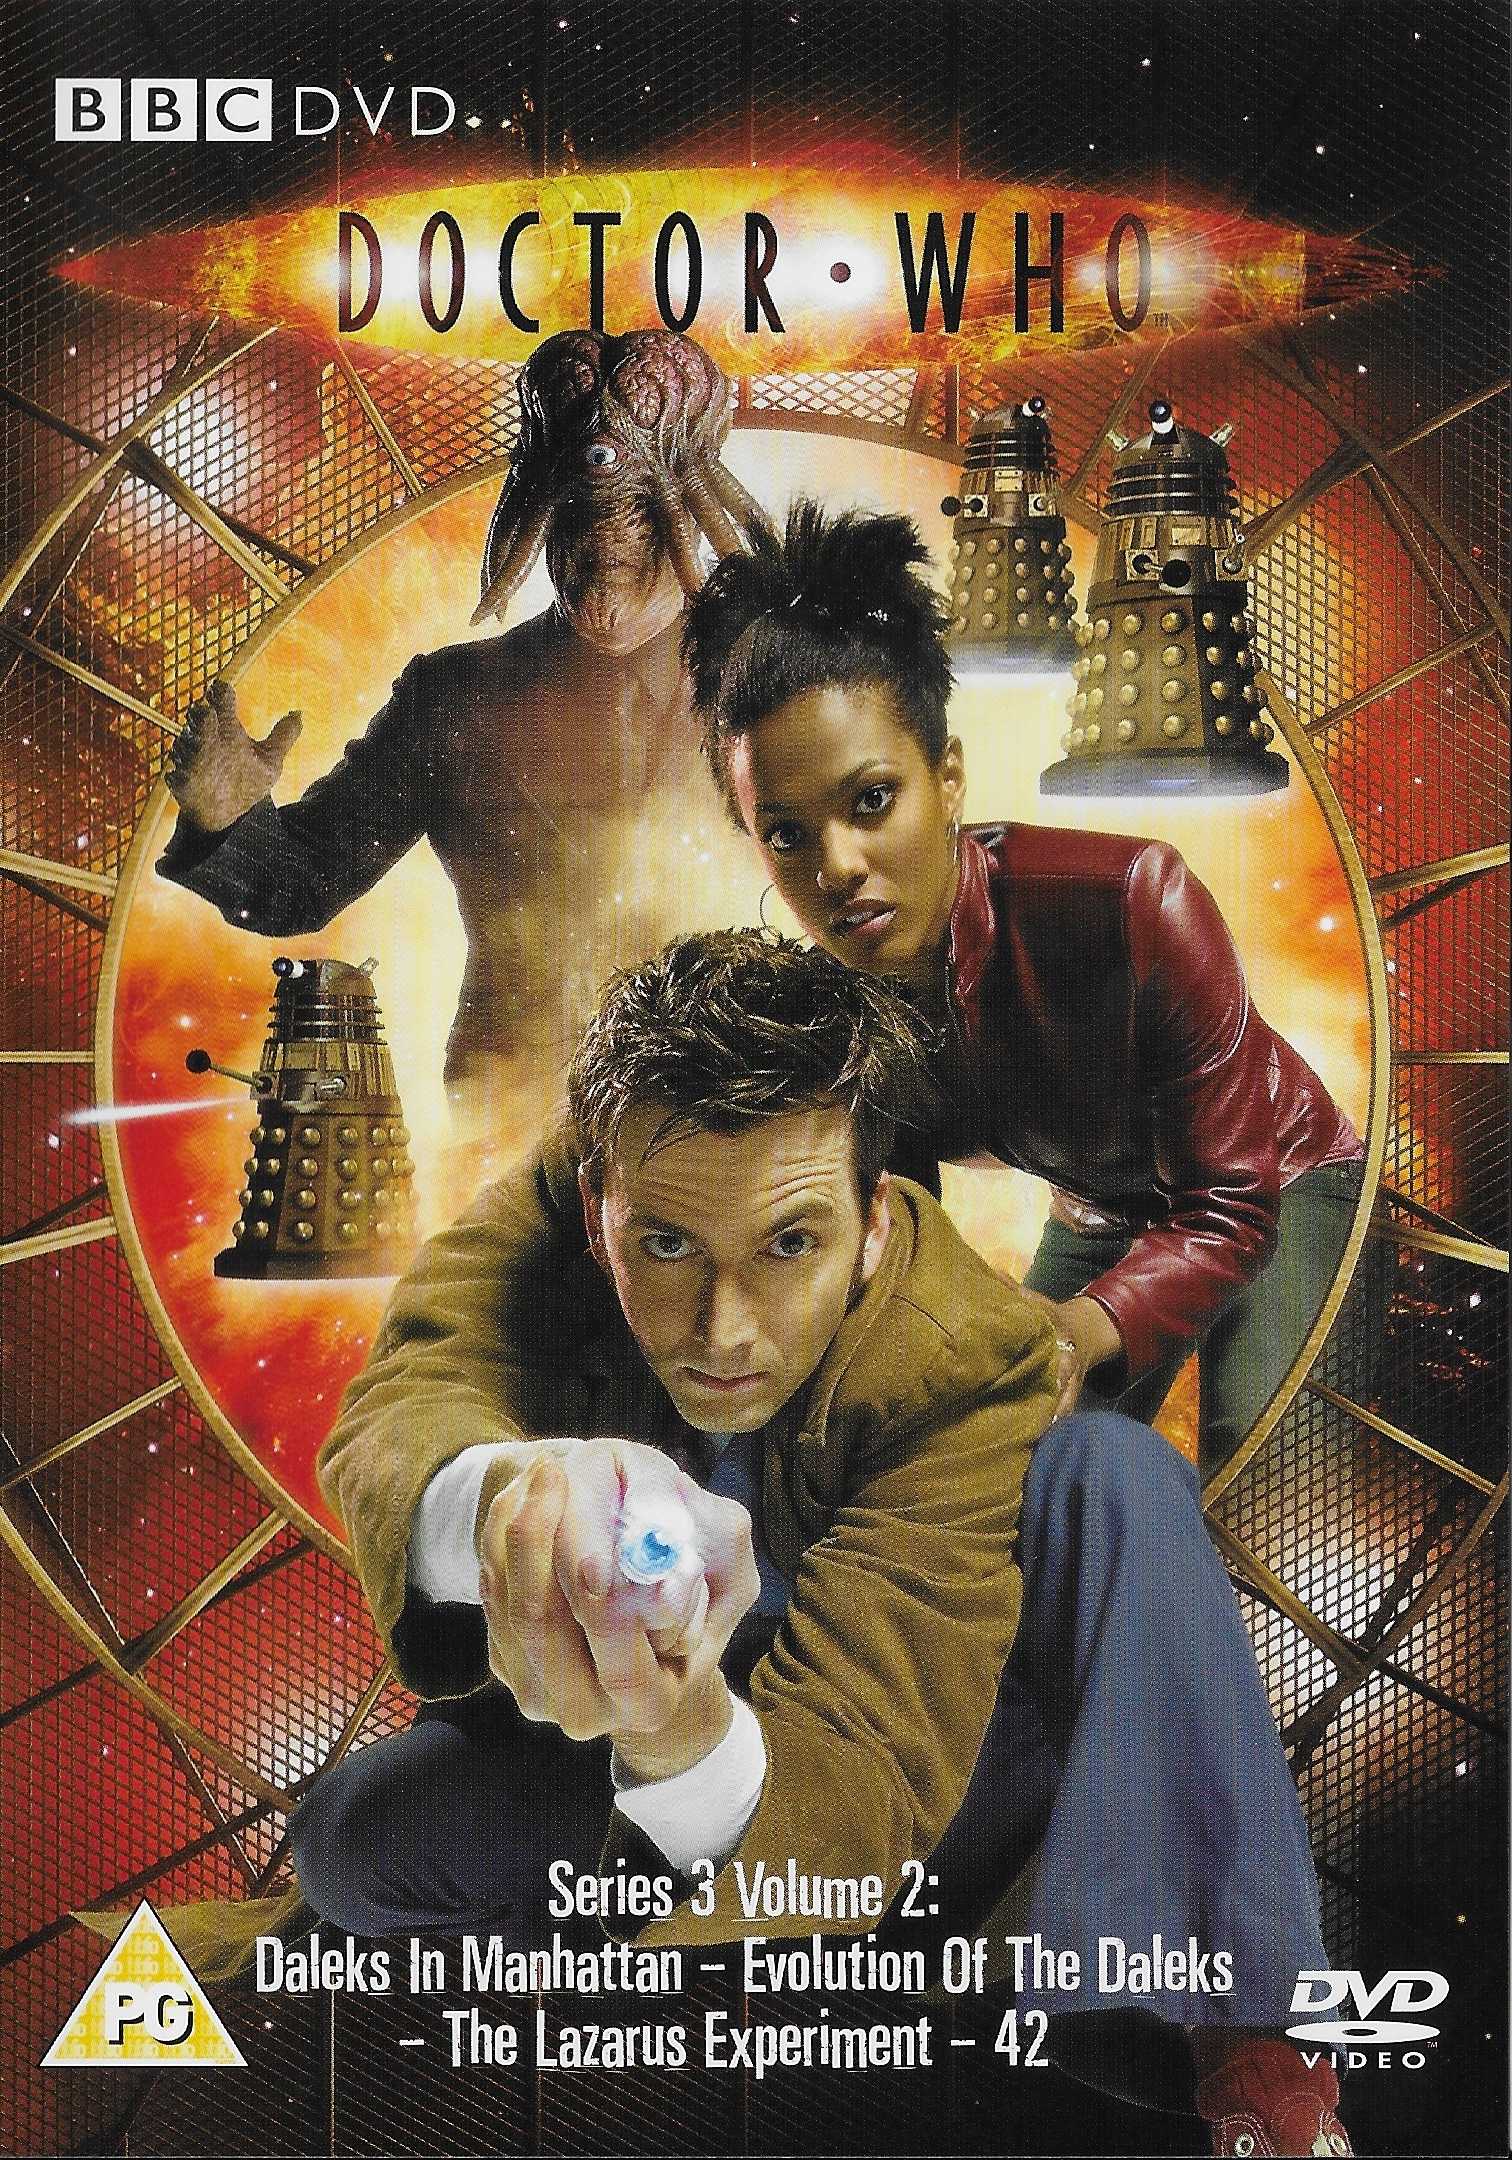 Picture of BBCDVD 2382 Doctor Who - Series 3, volume 2 by artist Helen Raynor / Stephen Greenhorn / Chris Chibnall from the BBC dvds - Records and Tapes library